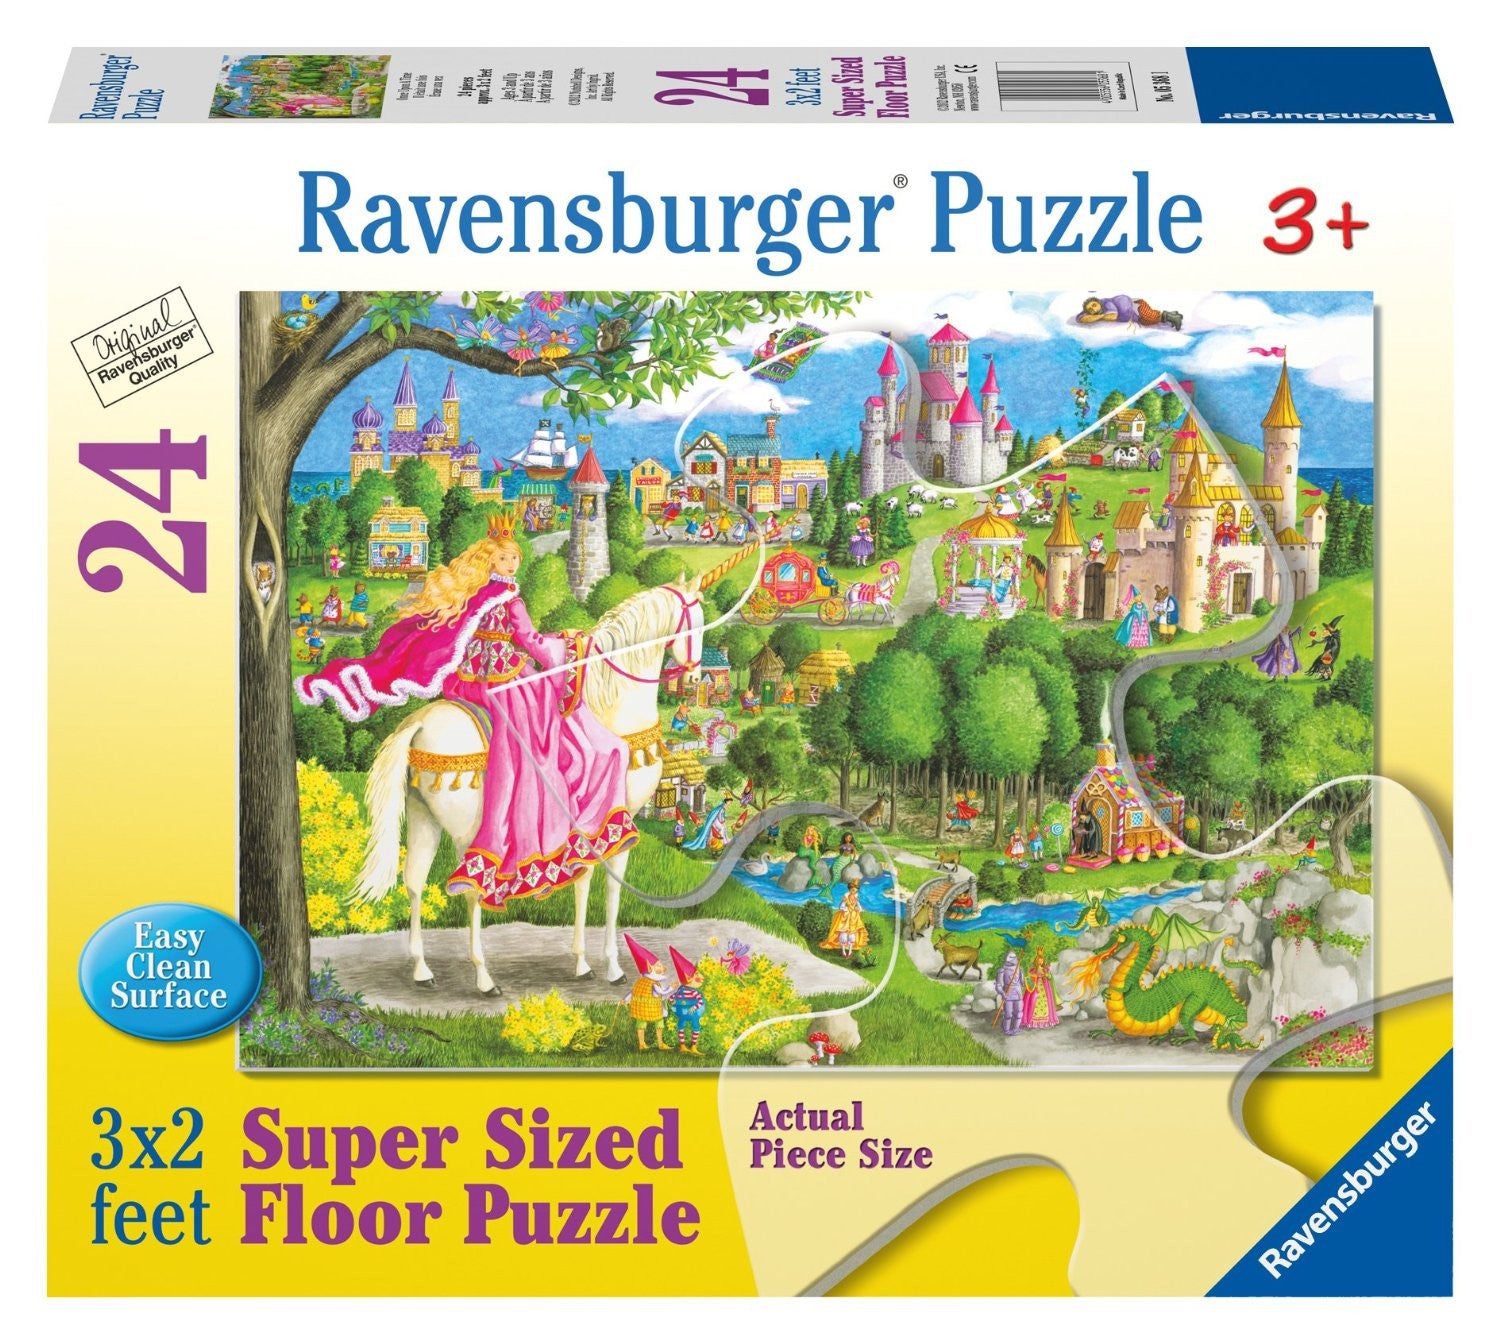 Ravensburger Children's Puzzles 24 pc Super Sized Floor Puzzles - Once Upon A Time 5368